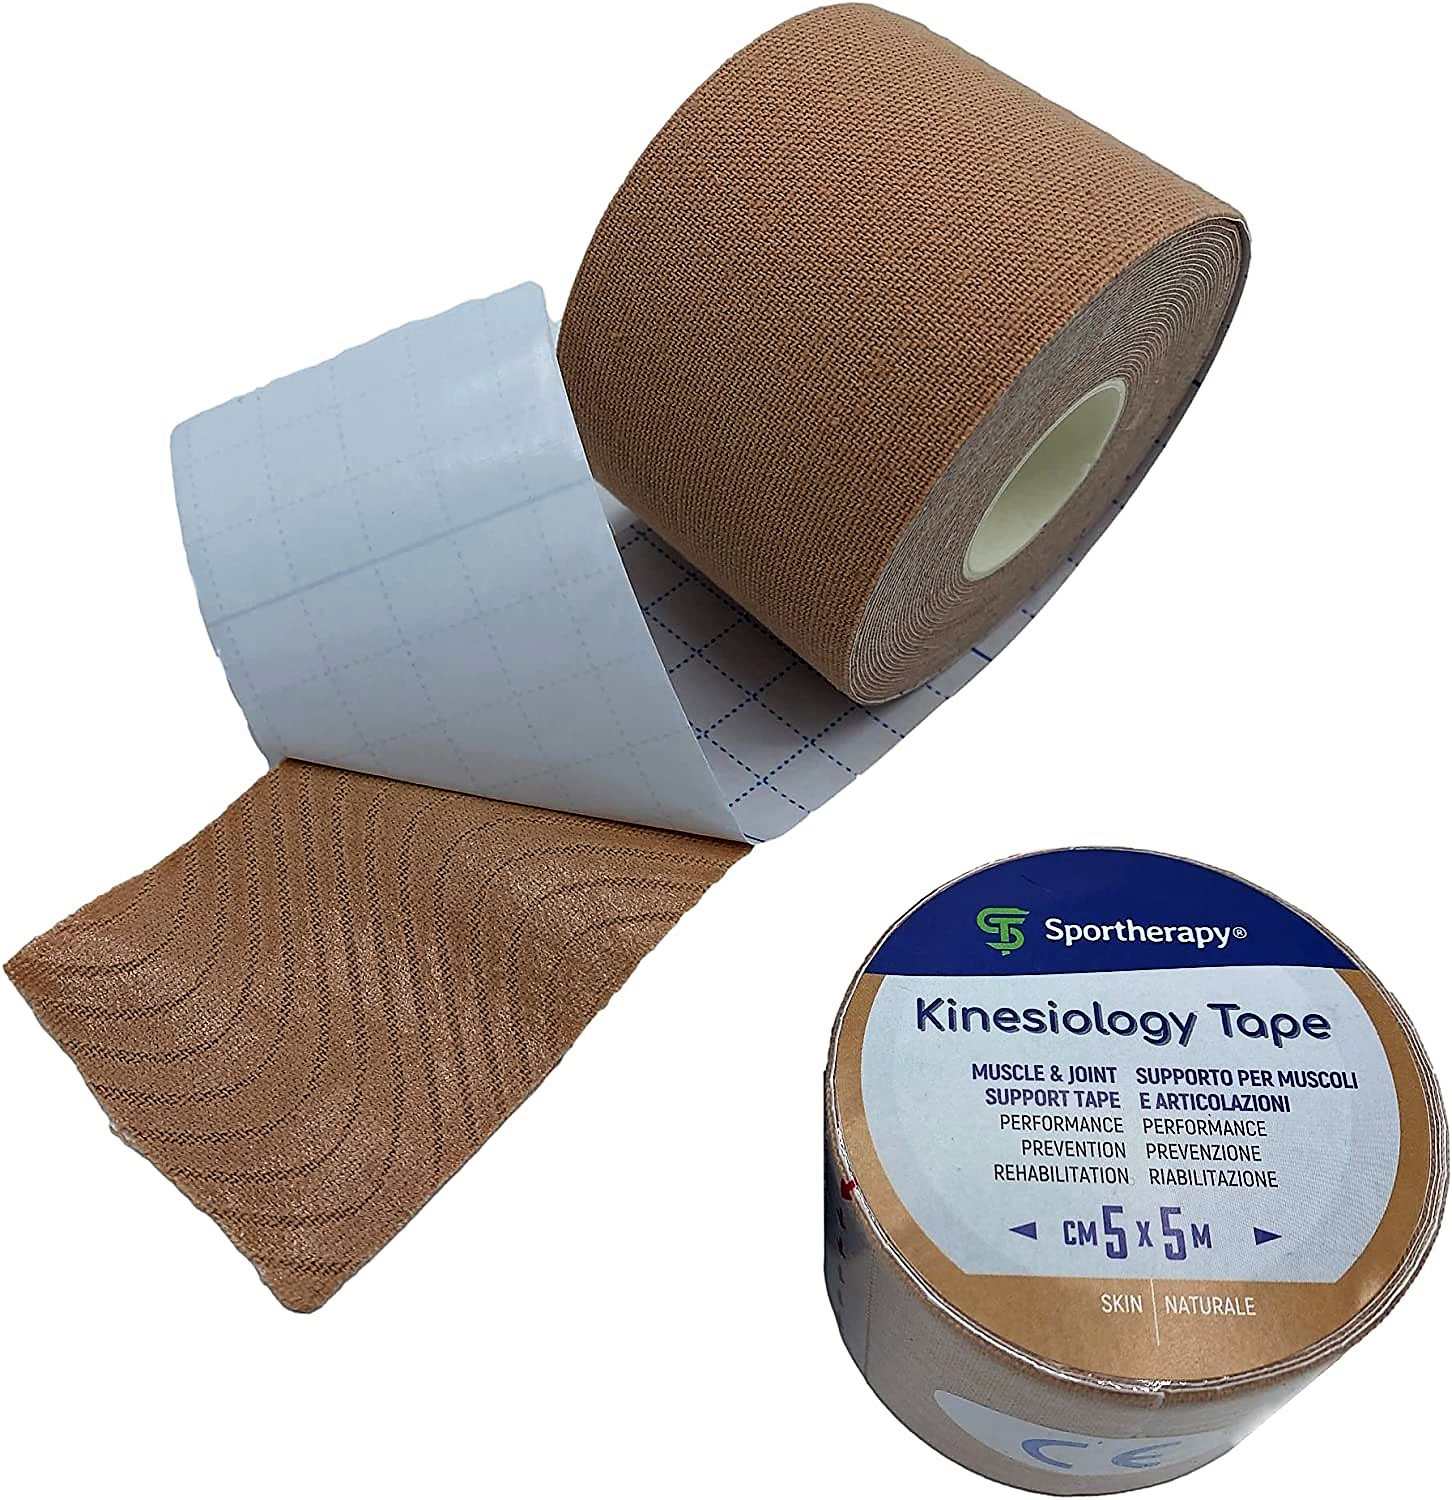 Torinomed – SPORTHERAPY KINESIOLOGY TAPE  5 cm. x 5 mt. – colore NATURALE